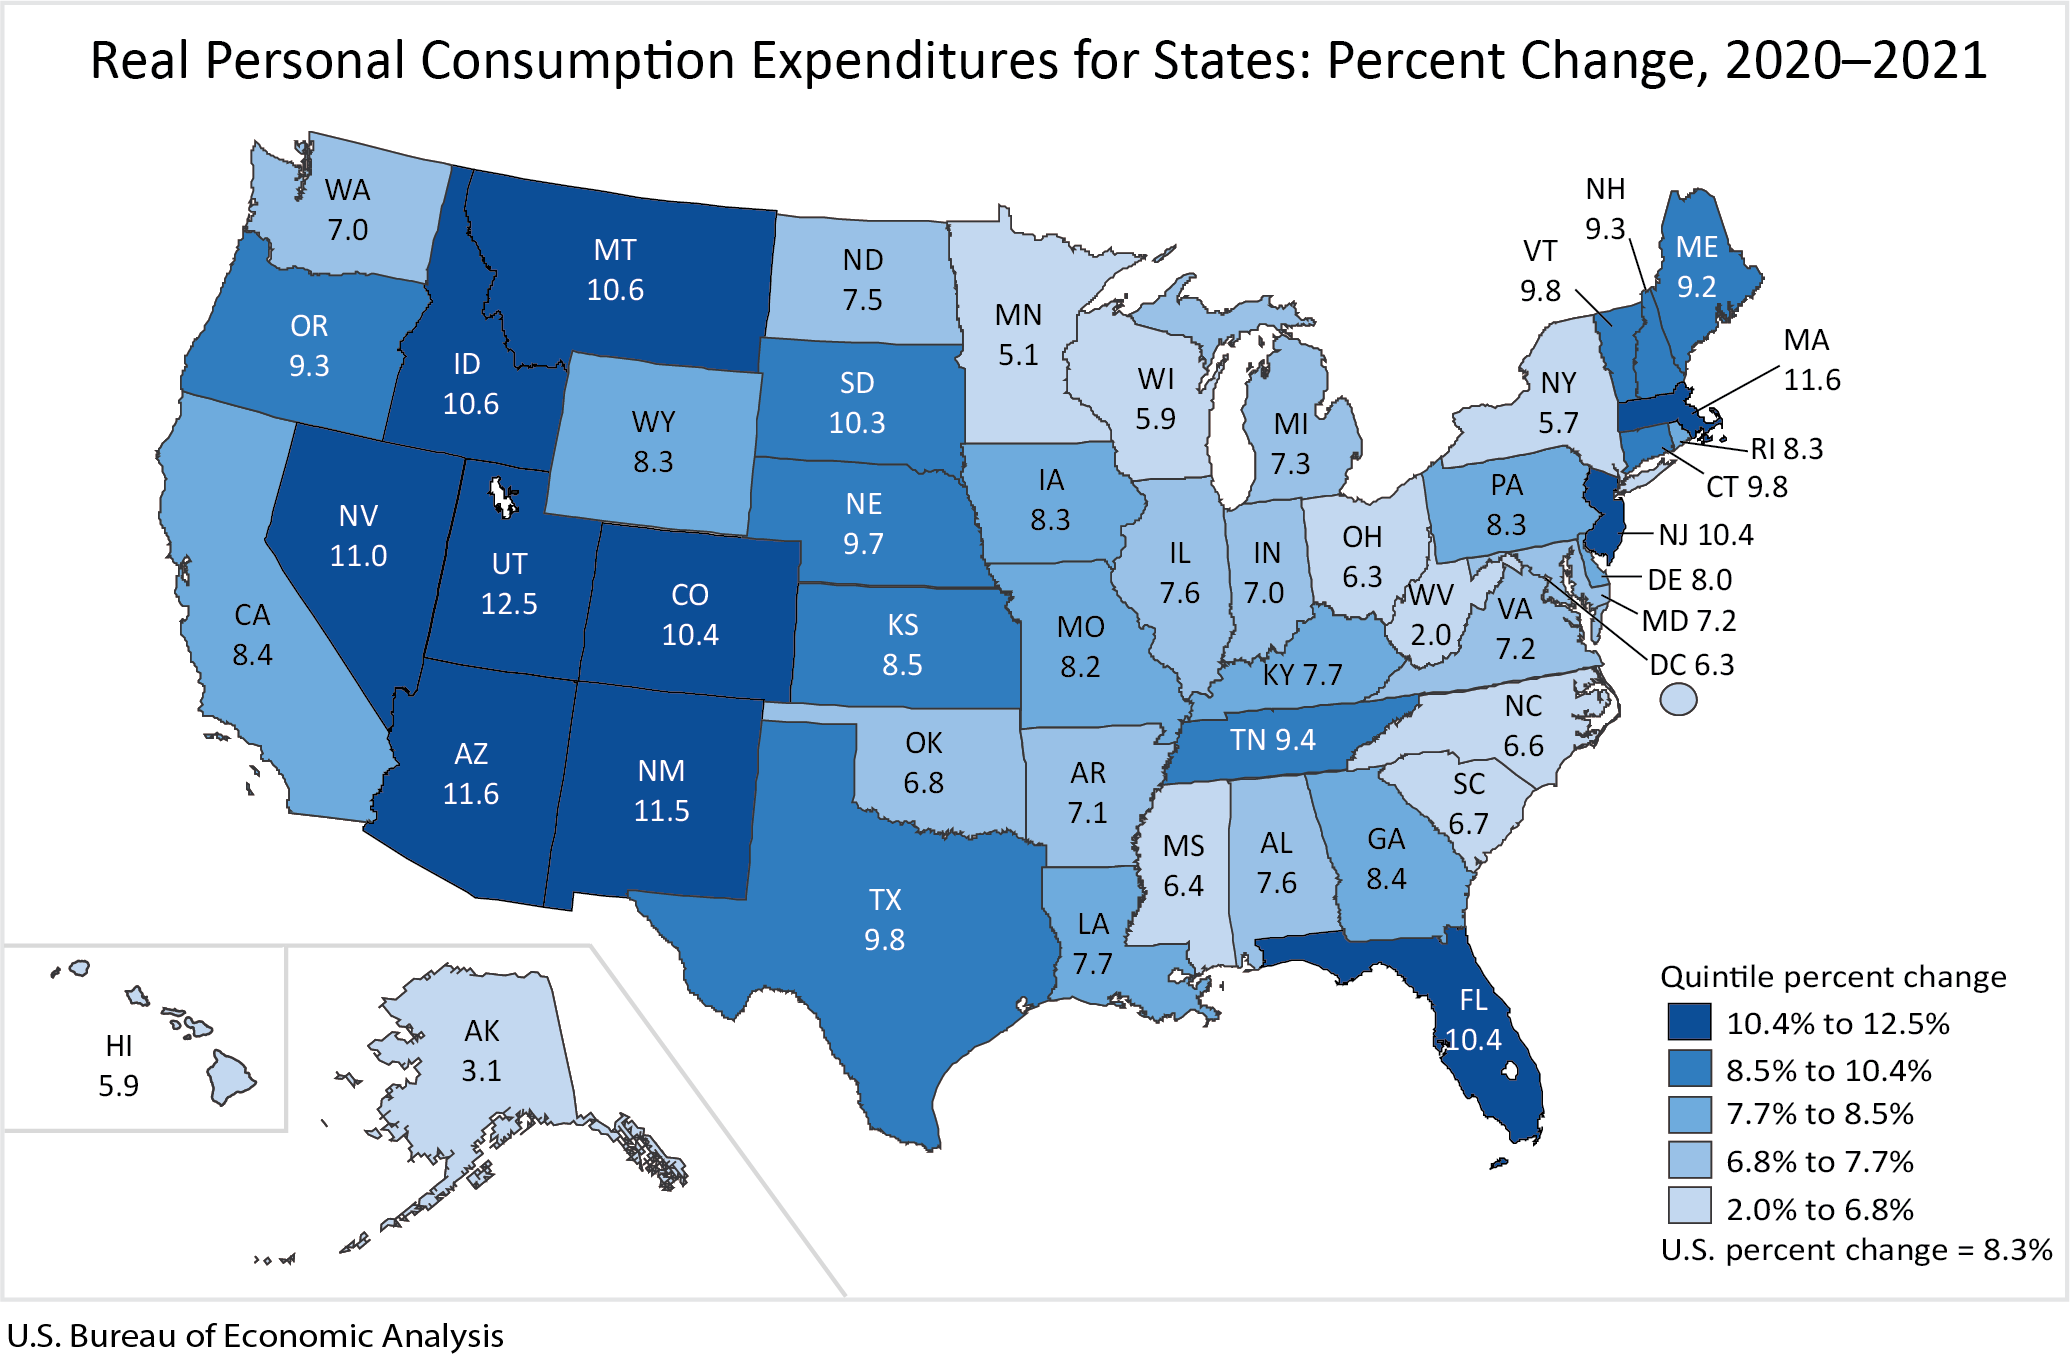 Real Personal Consumption Expenditures for States: Percent Change, 2020-2021